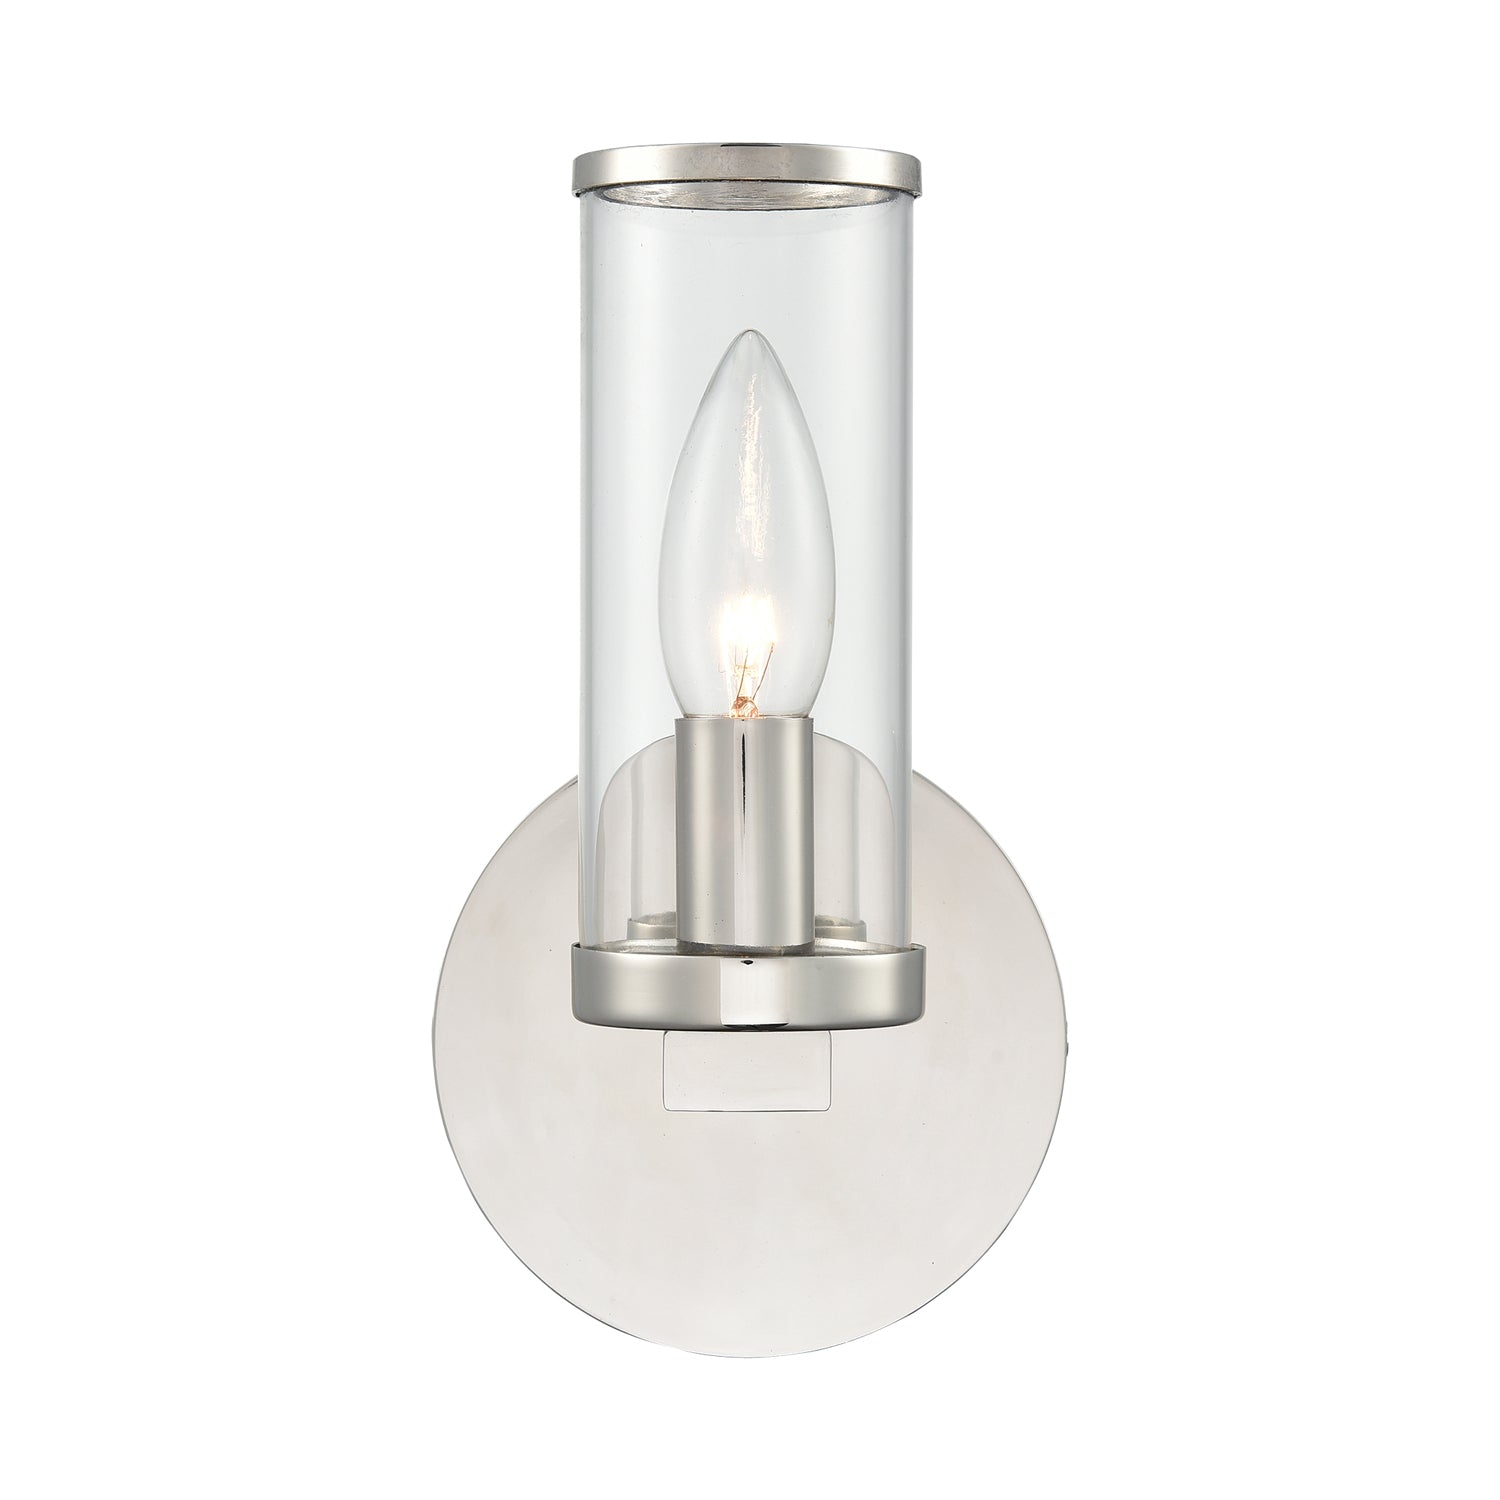 Alora Canada - One Light Wall Sconce - Revolve - Clear Glass/Natural Brass|Clear Glass/Polished Nickel|Clear Glass/Urban Bronze- Union Lighting Luminaires Decor